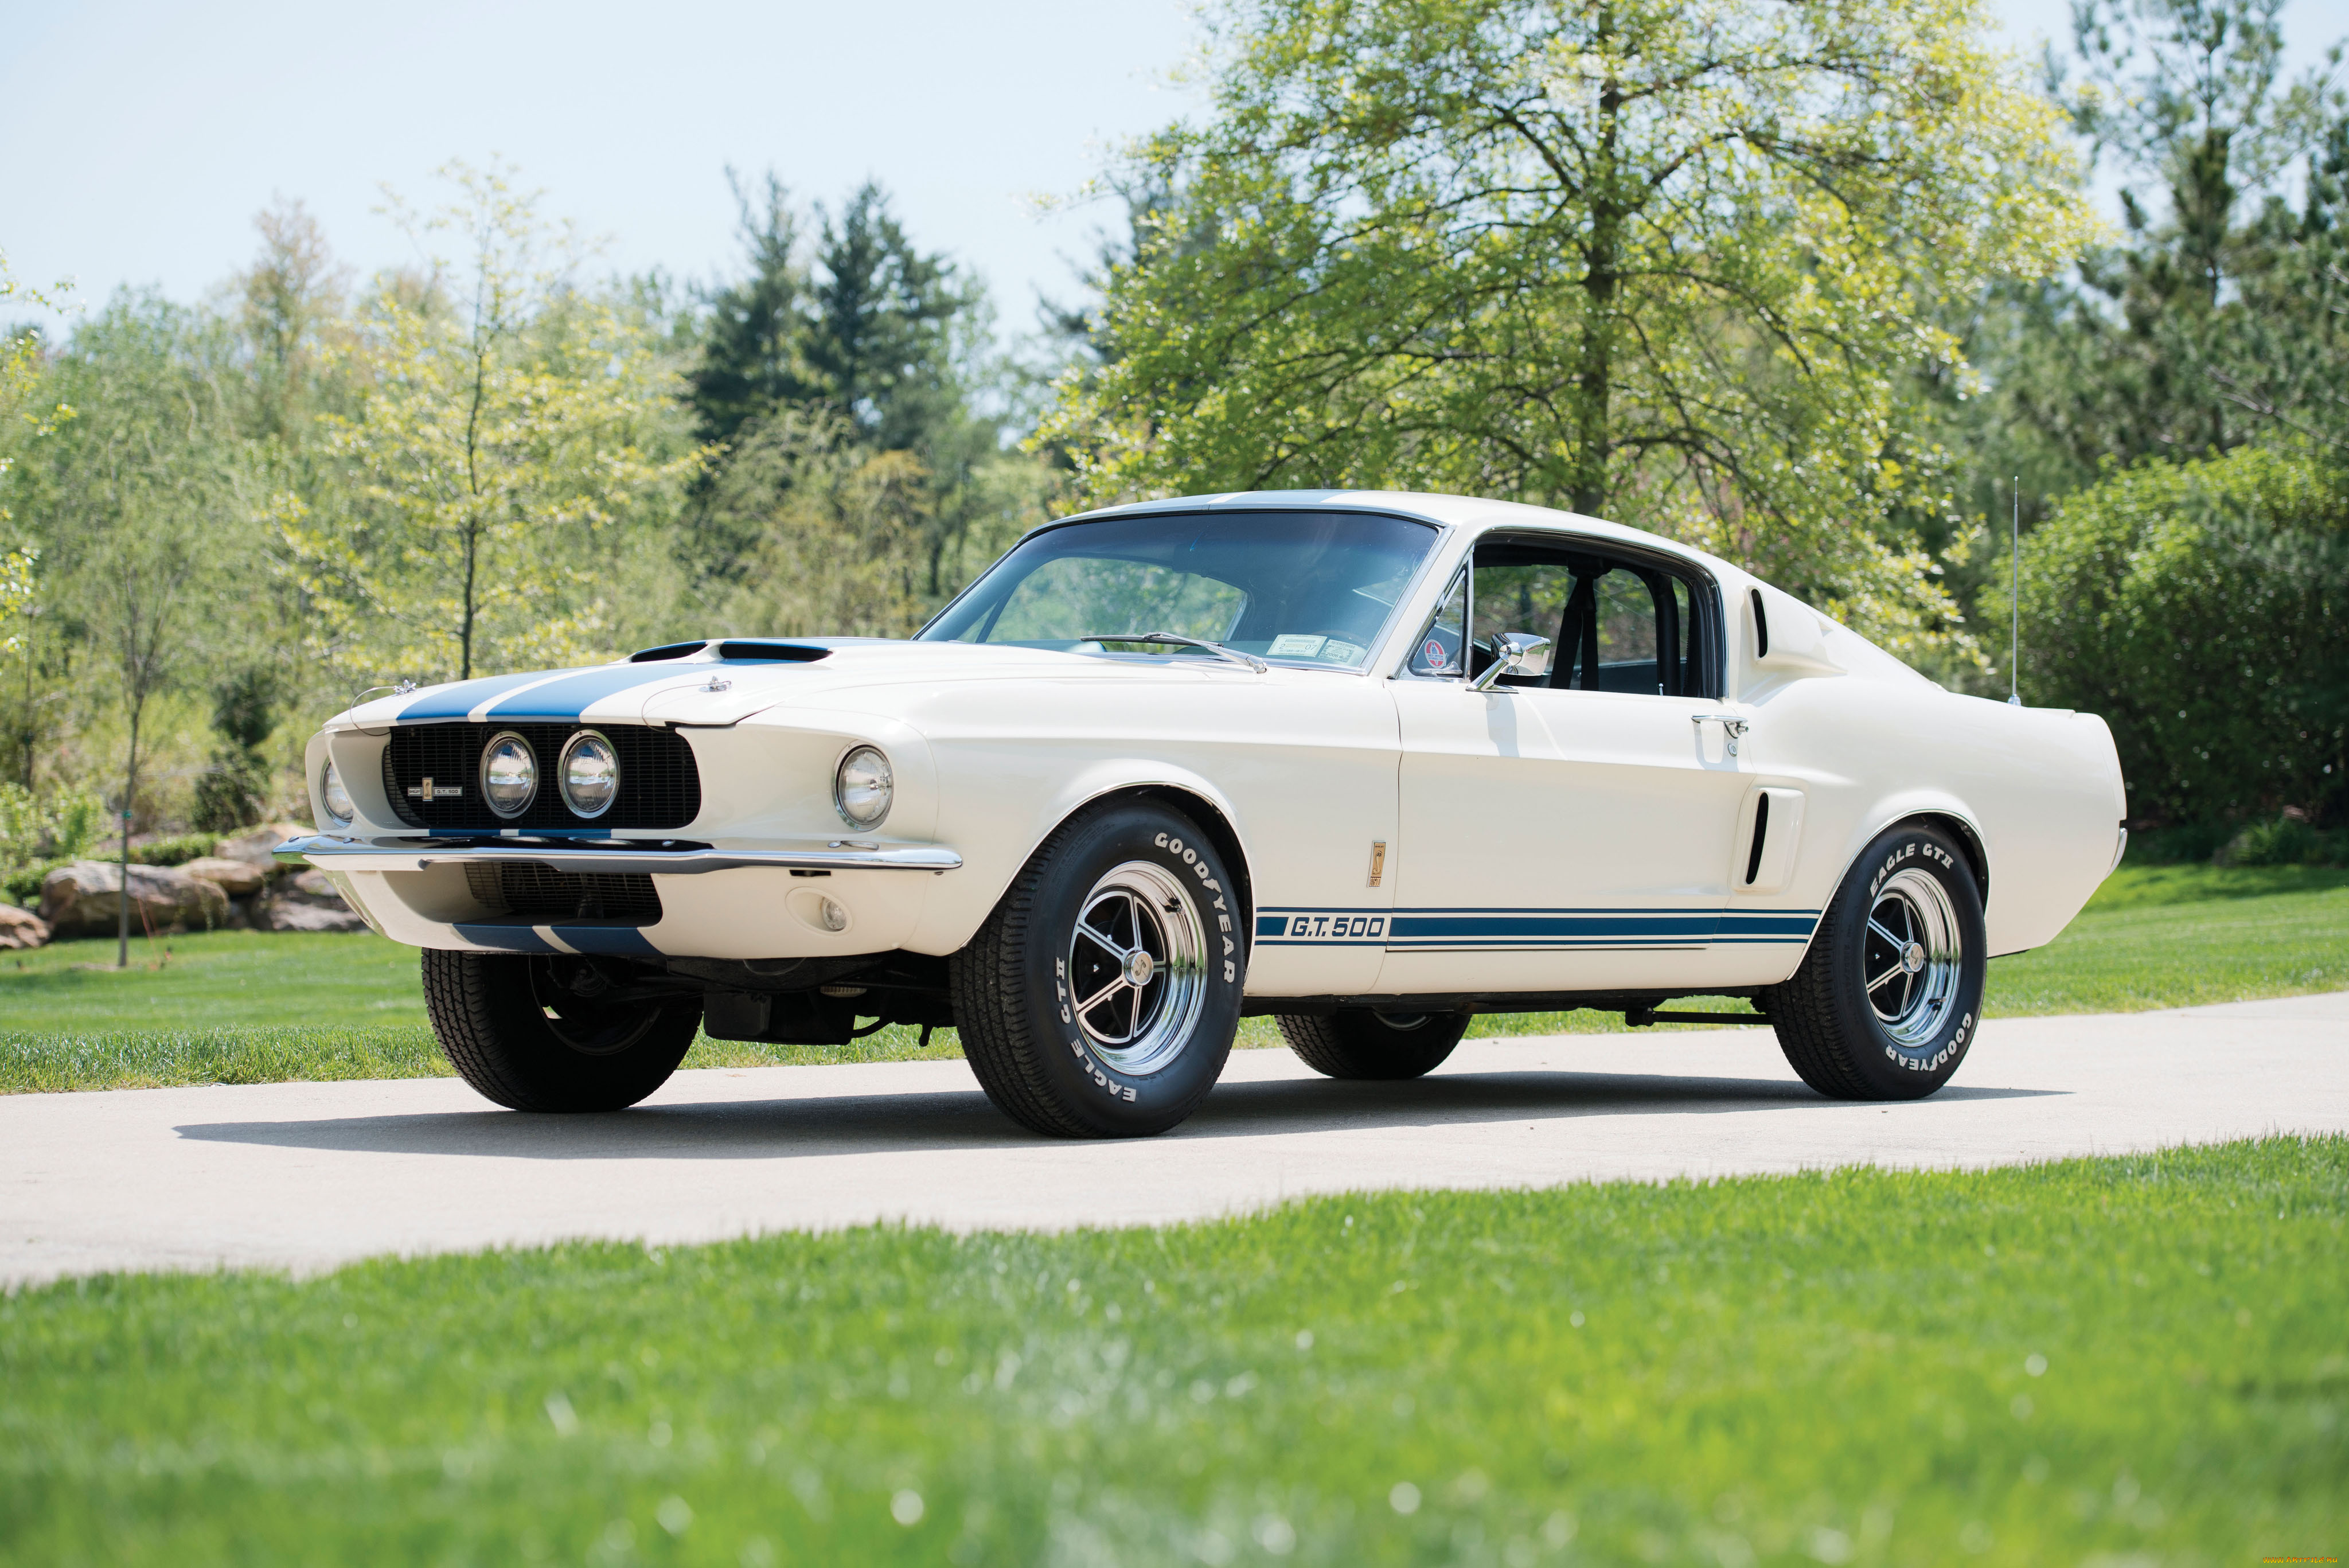 shelby gt500 with lemans stripes option, , mustang, shelby